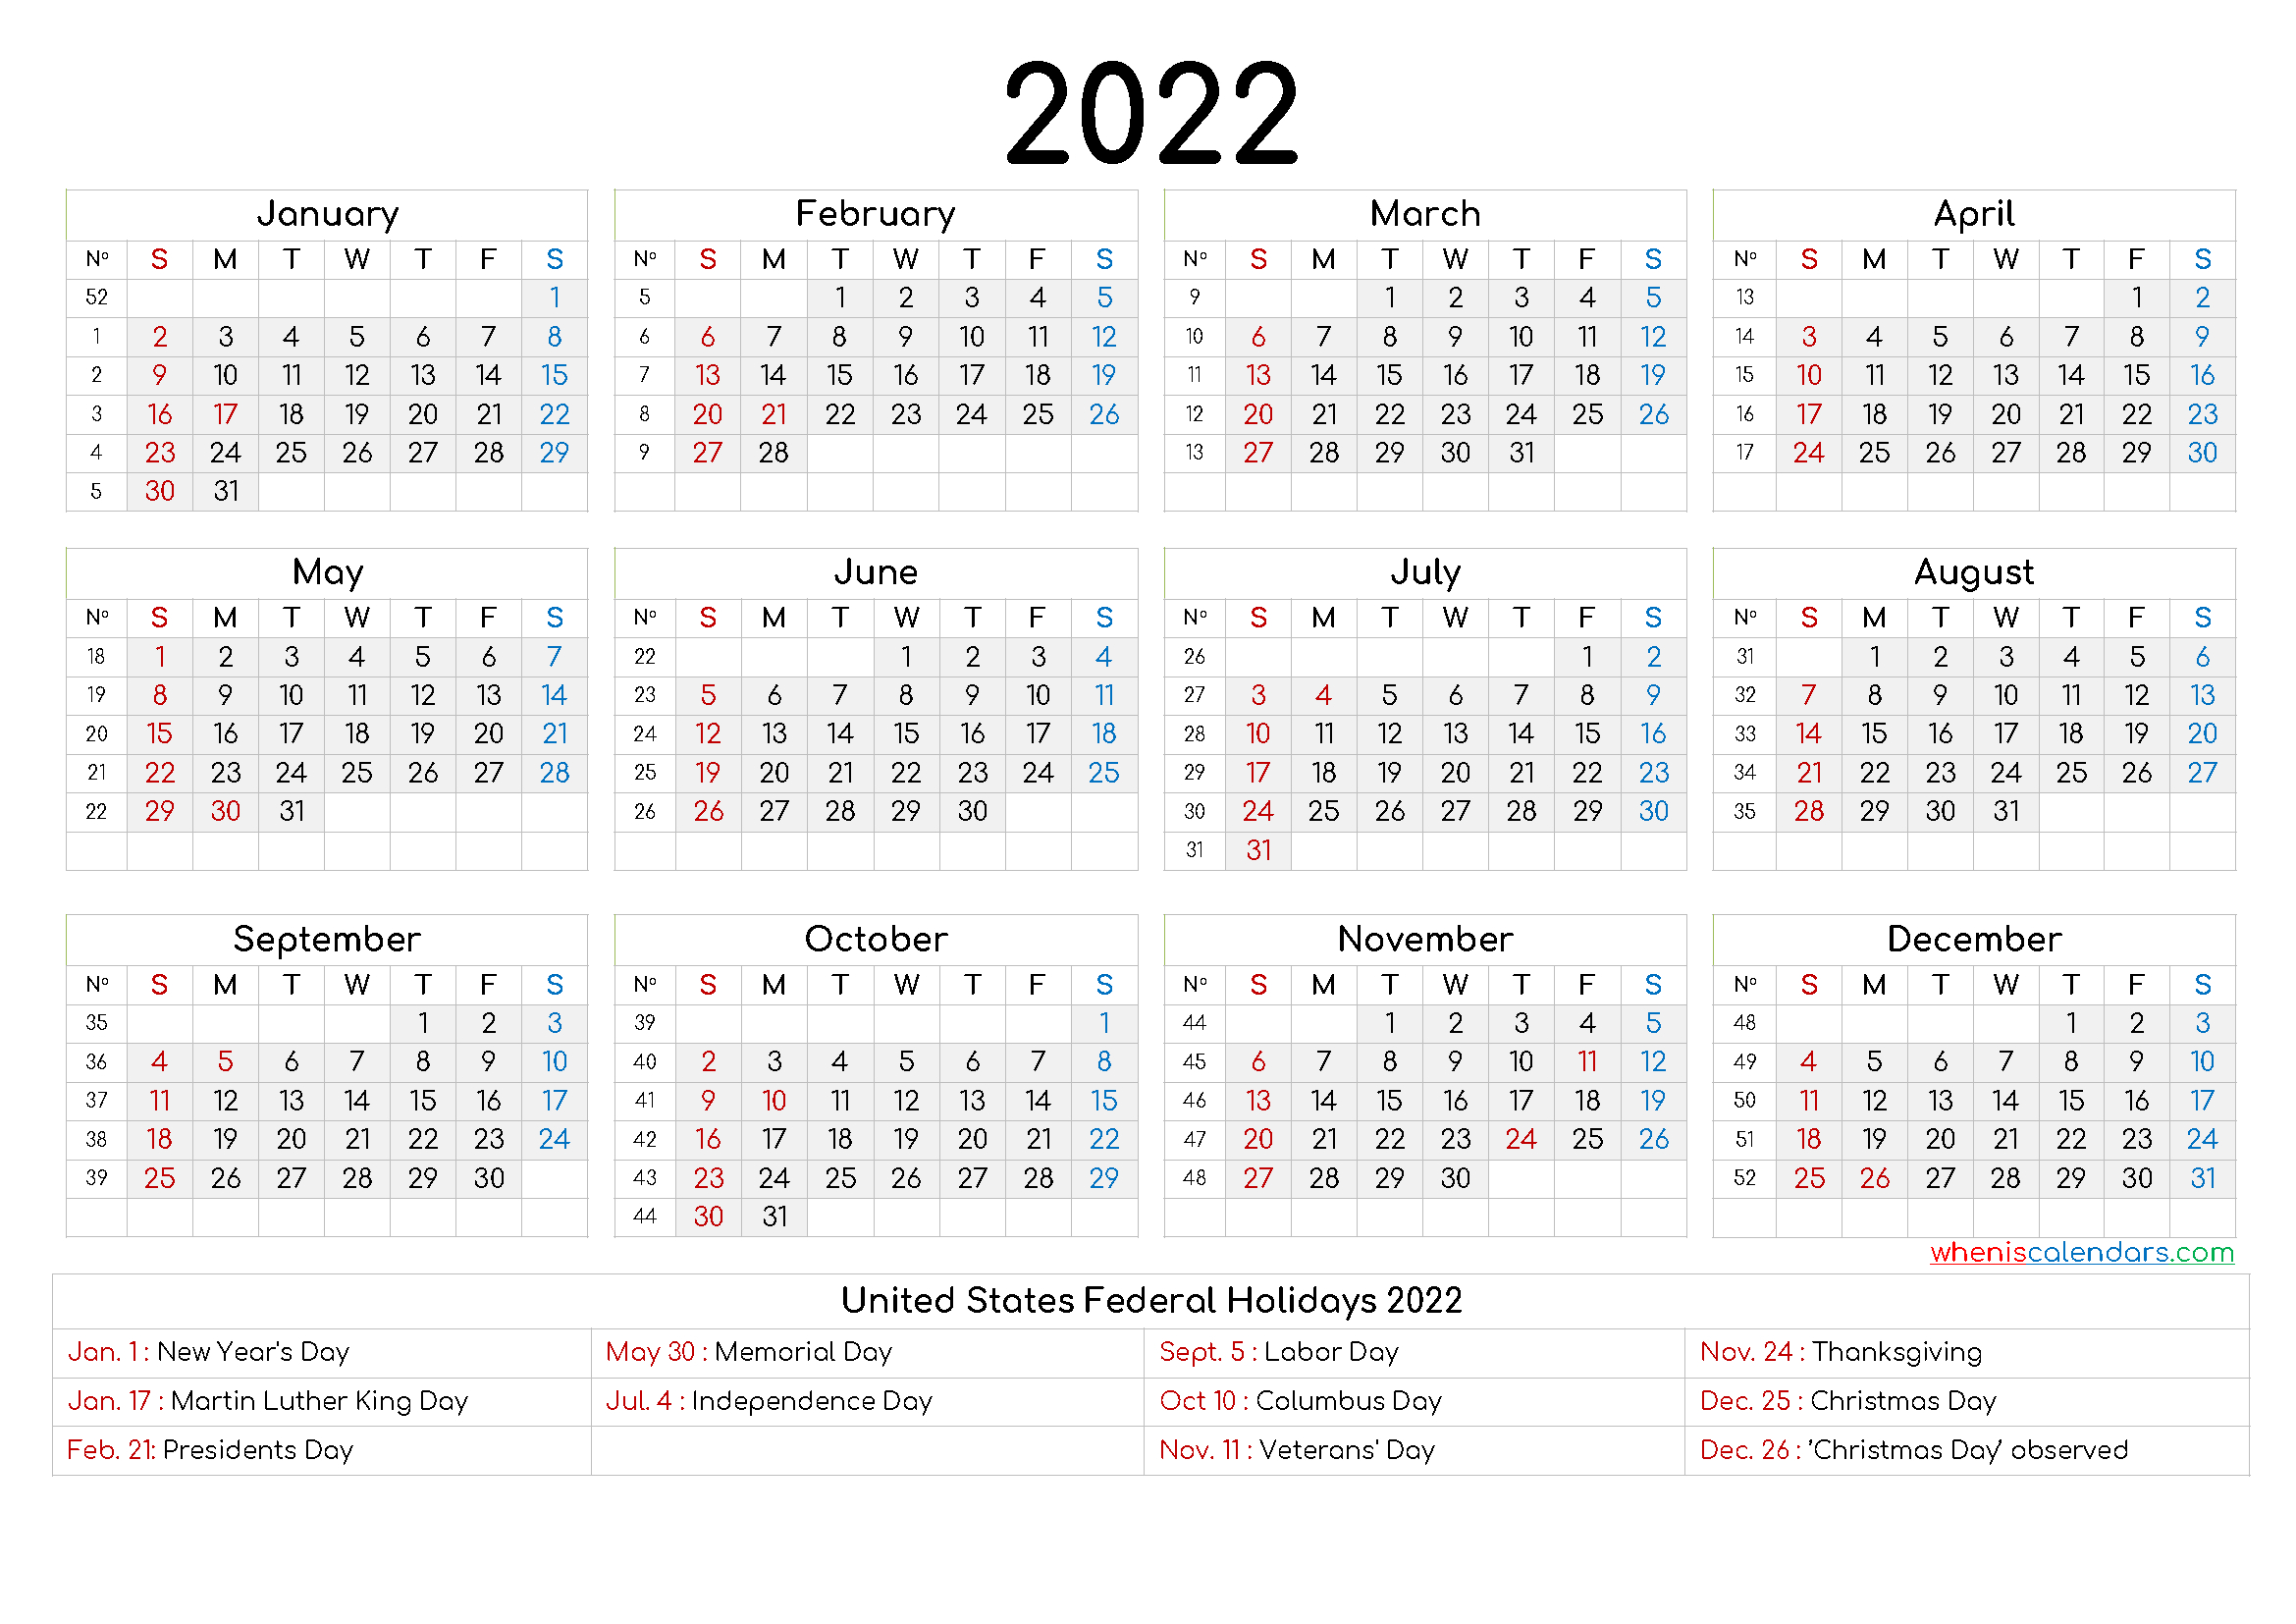 20+ Yearly Calendar 2022 - Free Download Printable Calendar Templates ️-2022 Printable Calendar By Month